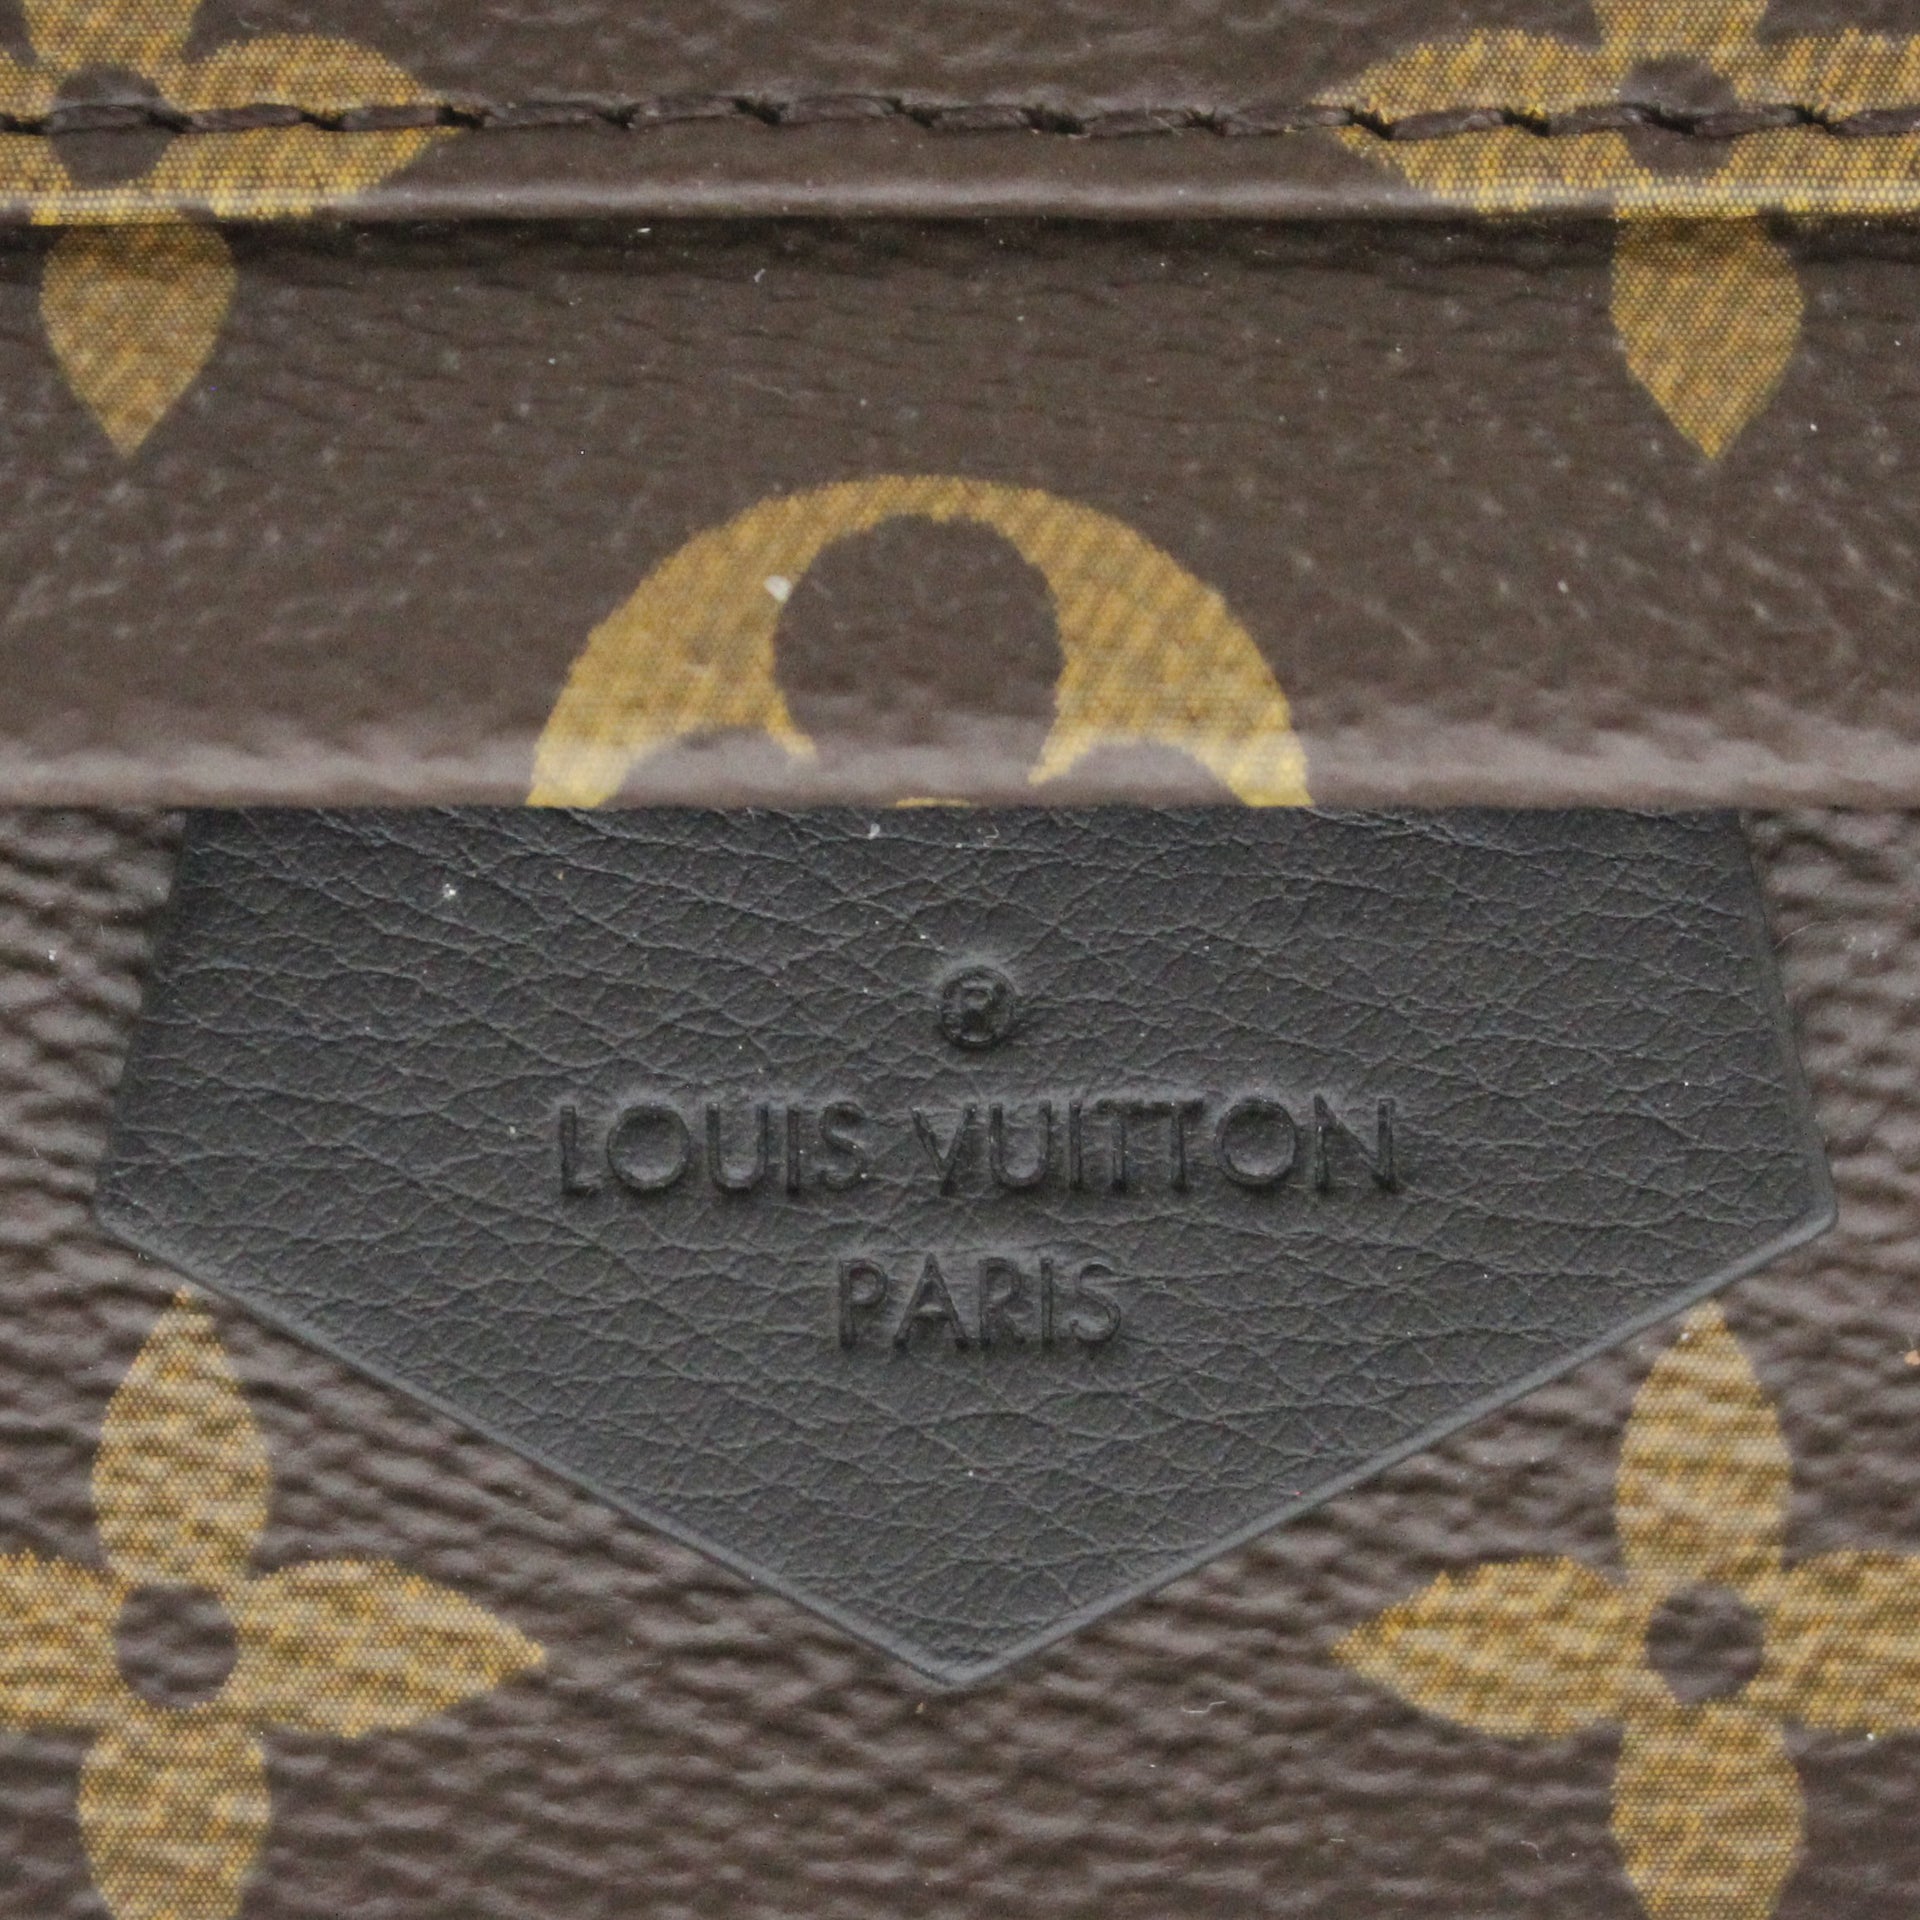 AUTHENTIC LV Palm Springs MM Backpack  Louis vuitton accessories, Leather  scarf, Louis vuitton